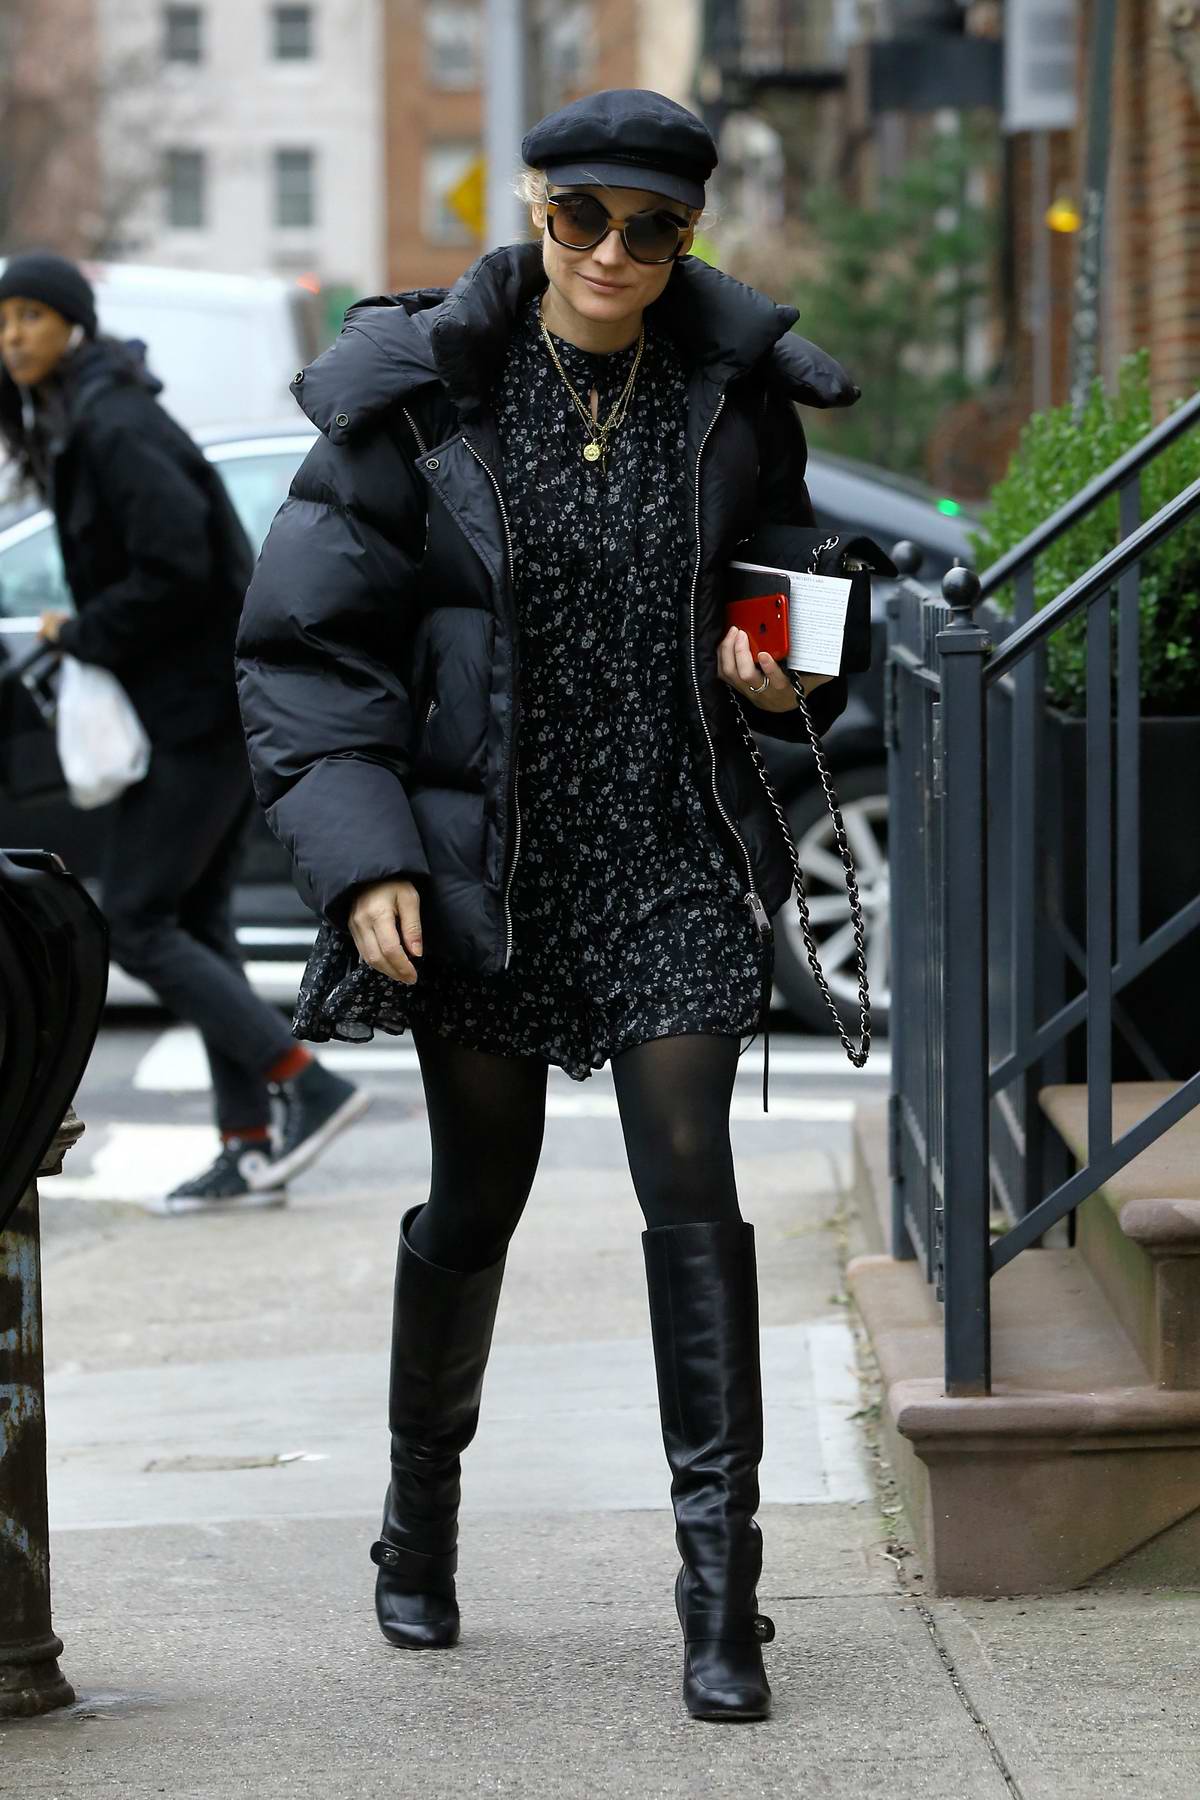 Diane Kruger bundles up for a chilly day in New York